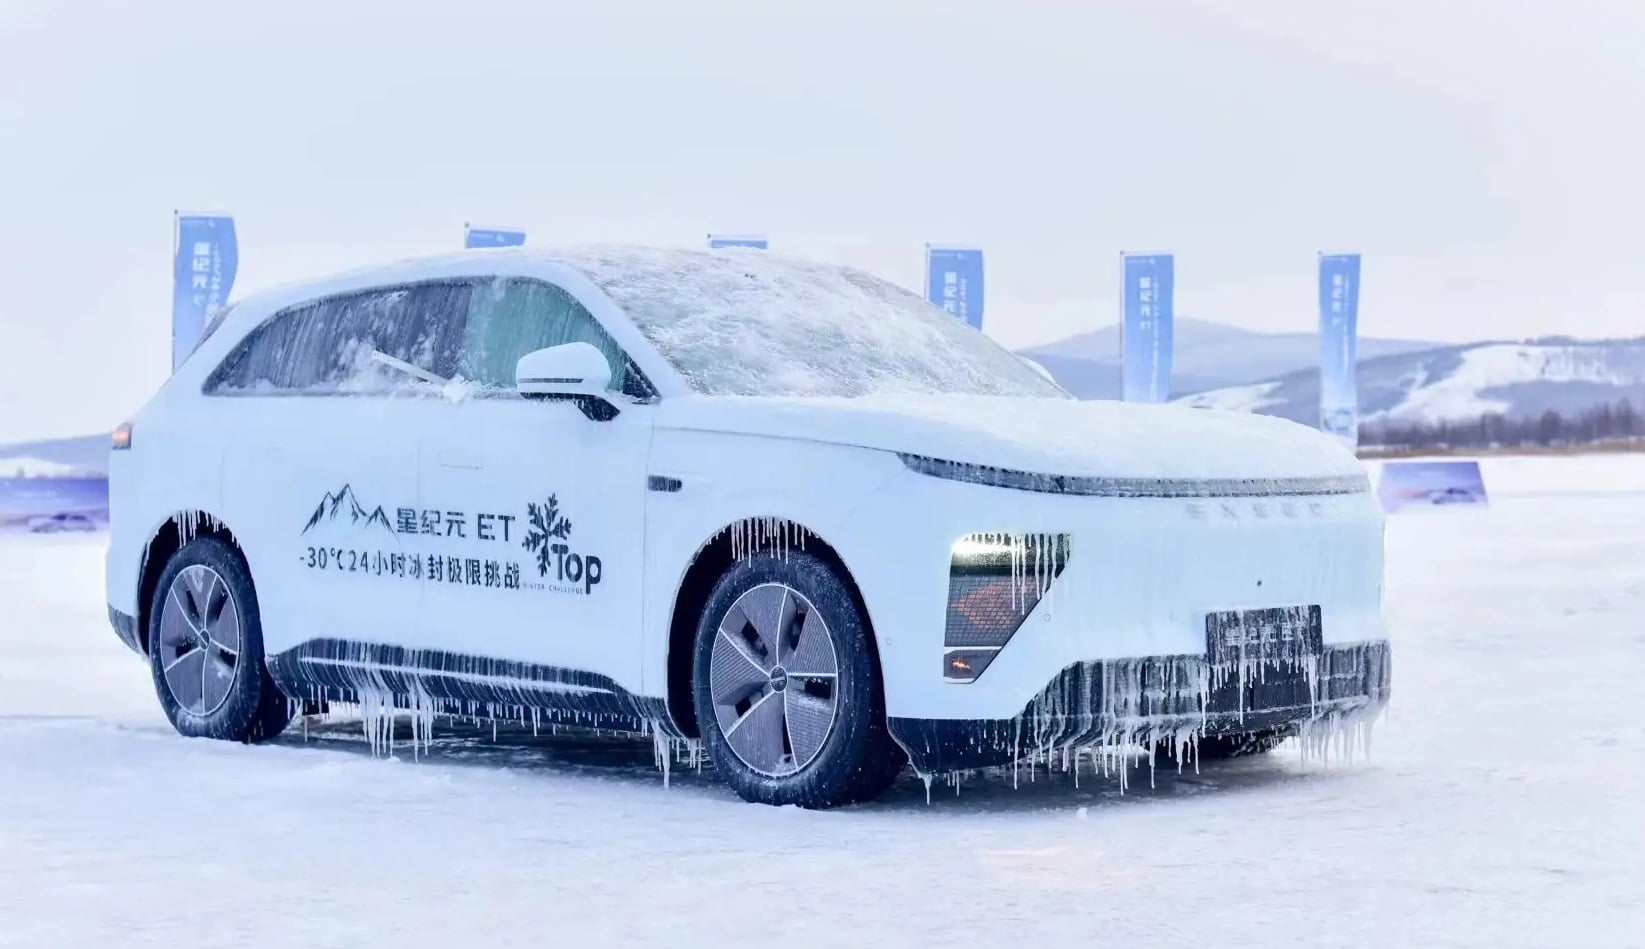 Exlantix ET with CATL’s LFP 2.0 Shenxing battery charges to 80% in 24 minutes in -20°C winter testing